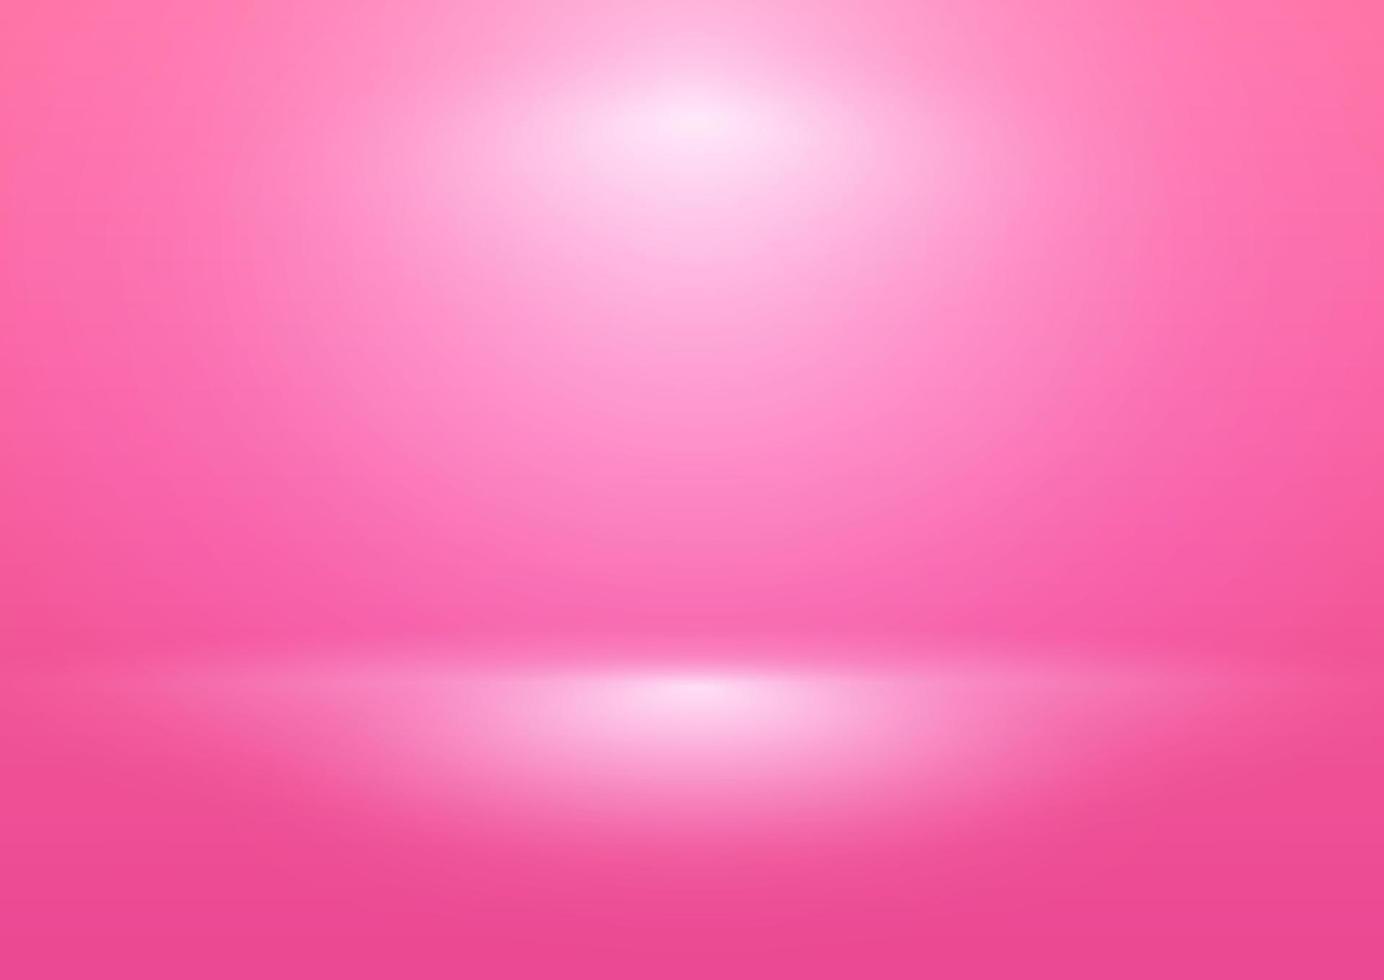 Abstract Frash light shining on the pink background with gradient blur. Picture can be used as an illustration, product advertising background image, template and backdrop. vector